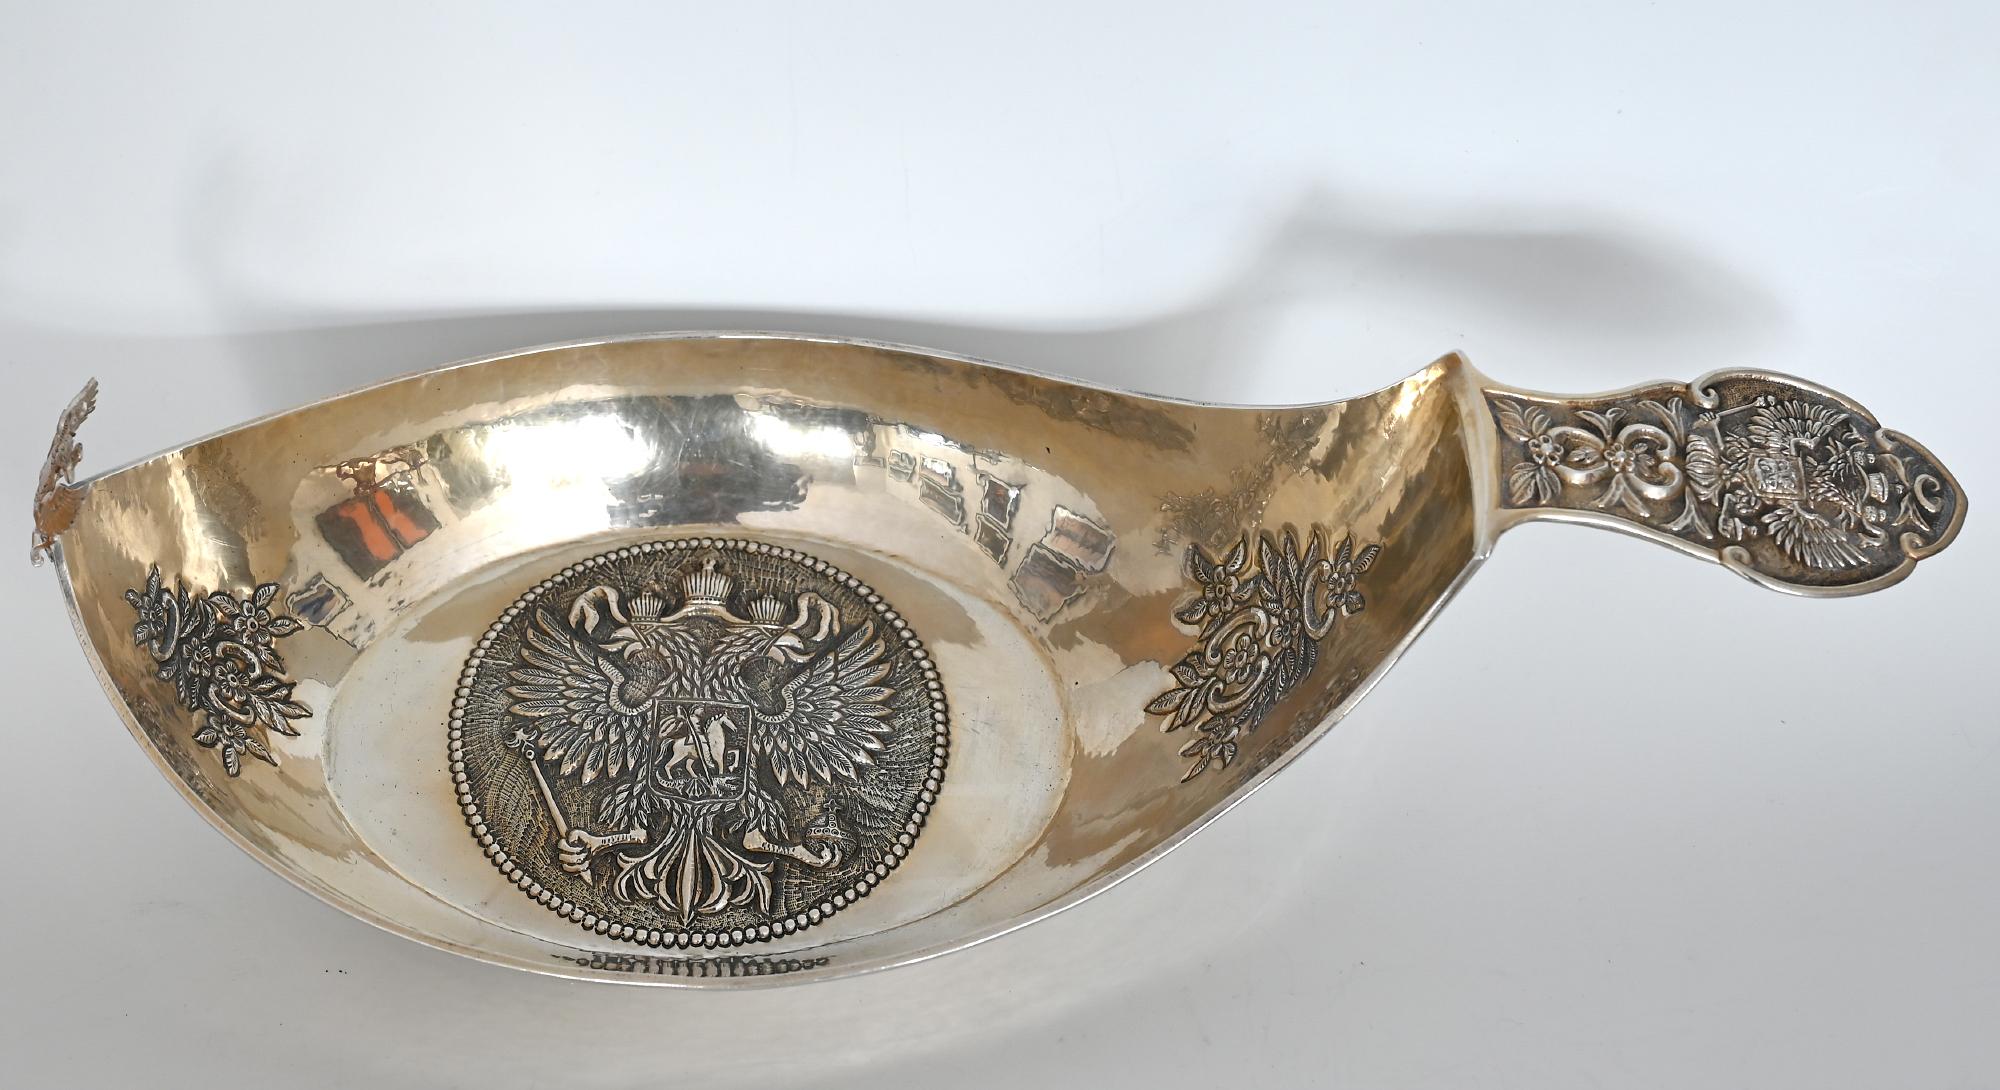 Large and important, ship shaped Imperial Kowsch , with the crowned double eagle and the rulers insignete on the base, the handle and the front.
In the middle of the ship you can see an eagle on the base and on the handle is St. George. The Kowsch